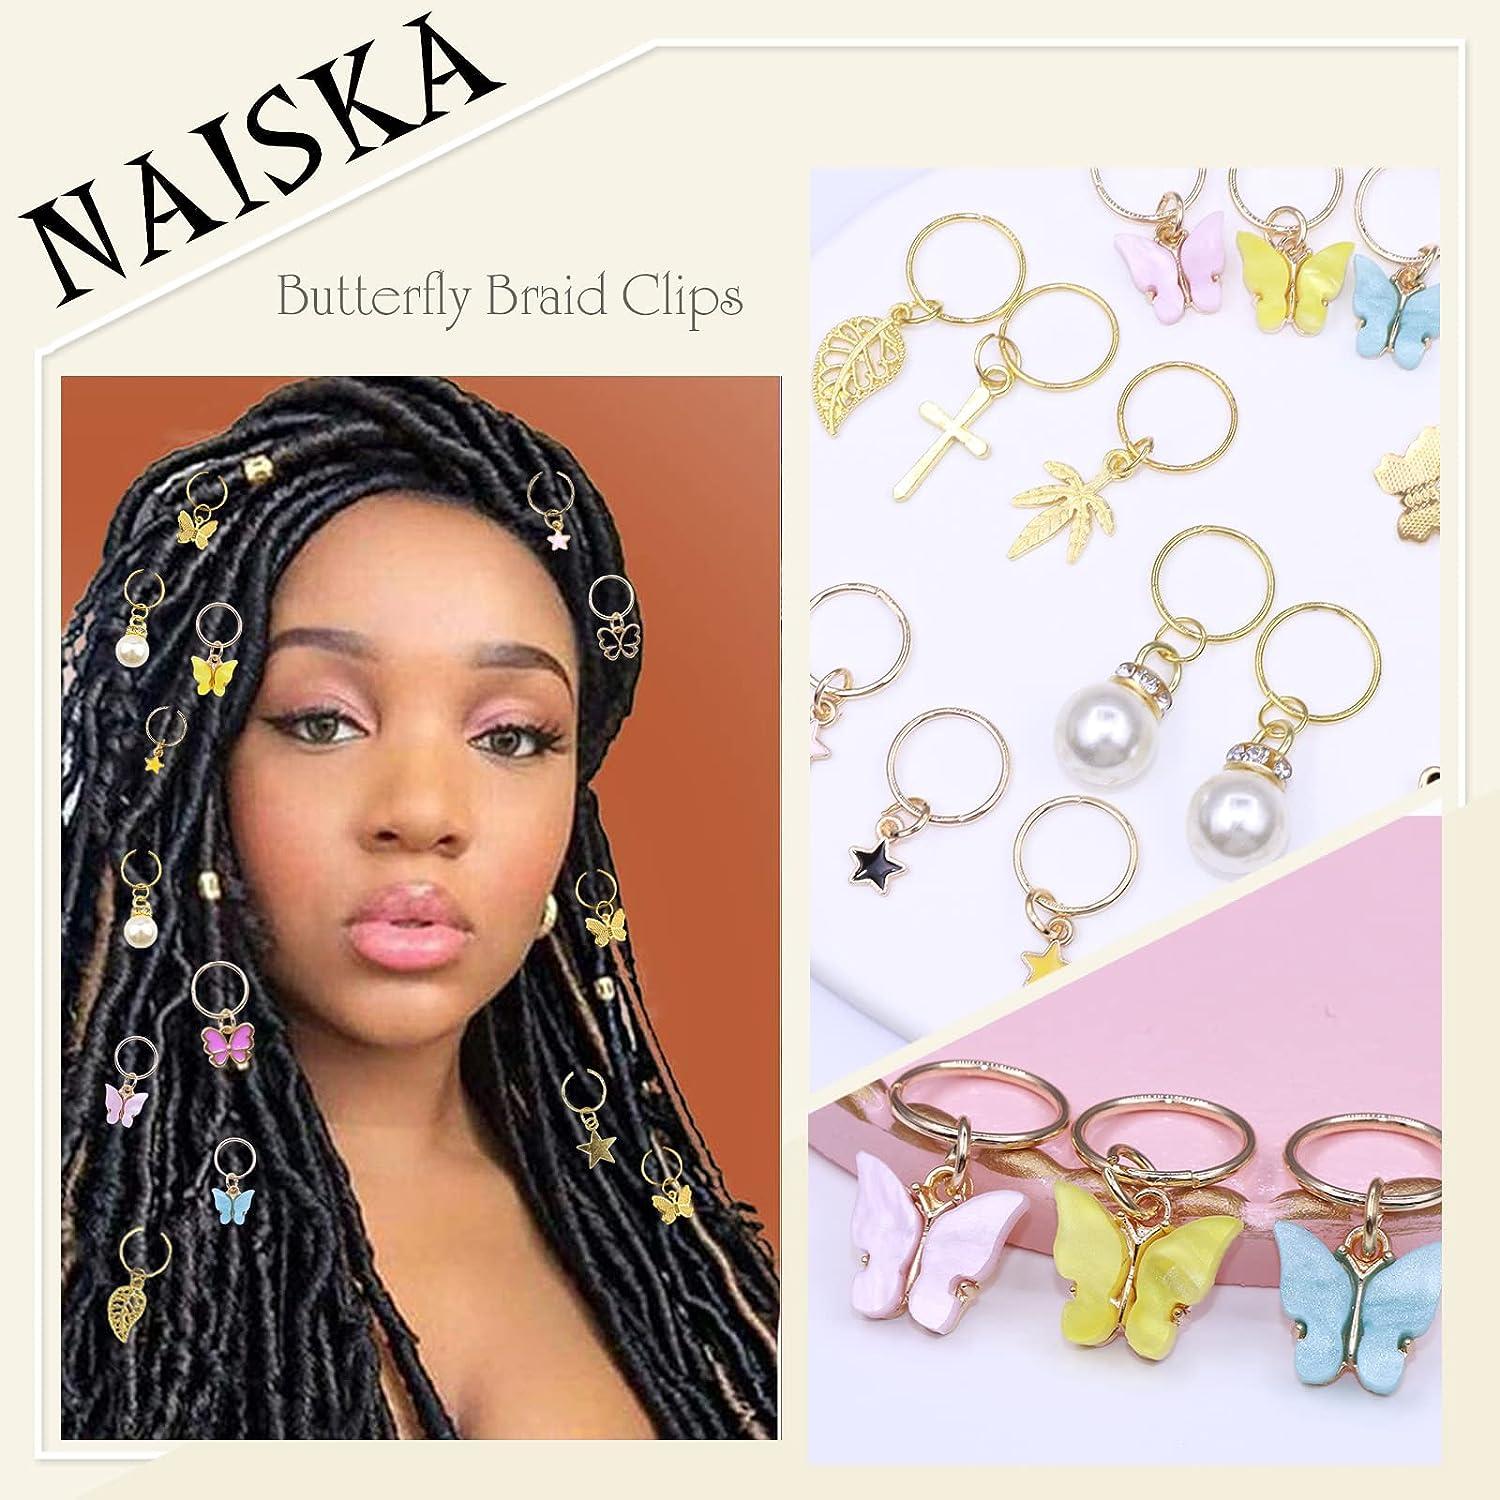 NAISKA 20Pcs Gold Butterfly Hair Braid Dreadlock Star Pearl Braid Clips  Accessories Colorful Butterflies Pendant Charms Pearl Shiny Hair Accessories  Clips Cuffs Rings African Beads Dreadlock Charms Jewelry Gifts for Wome